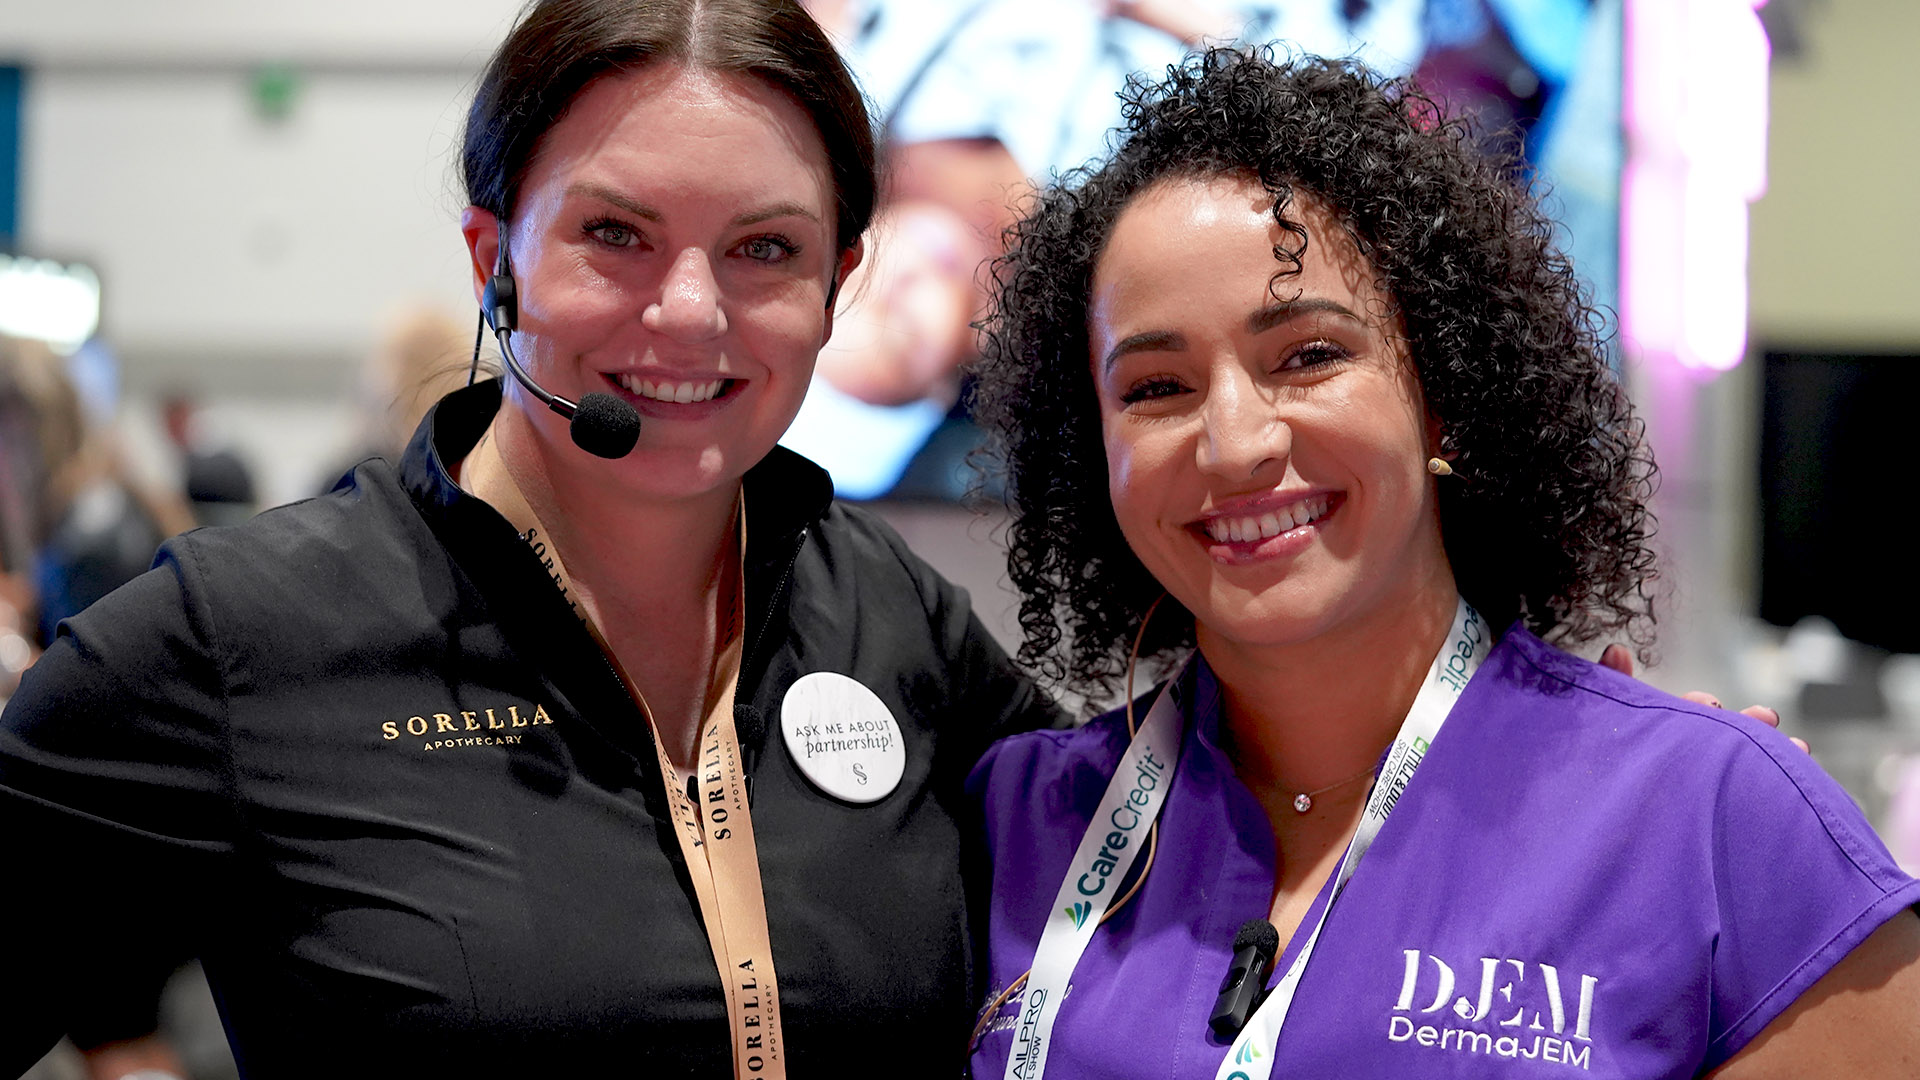 DermaJEM at the SKin and Body Conference with Sorella Apothecary